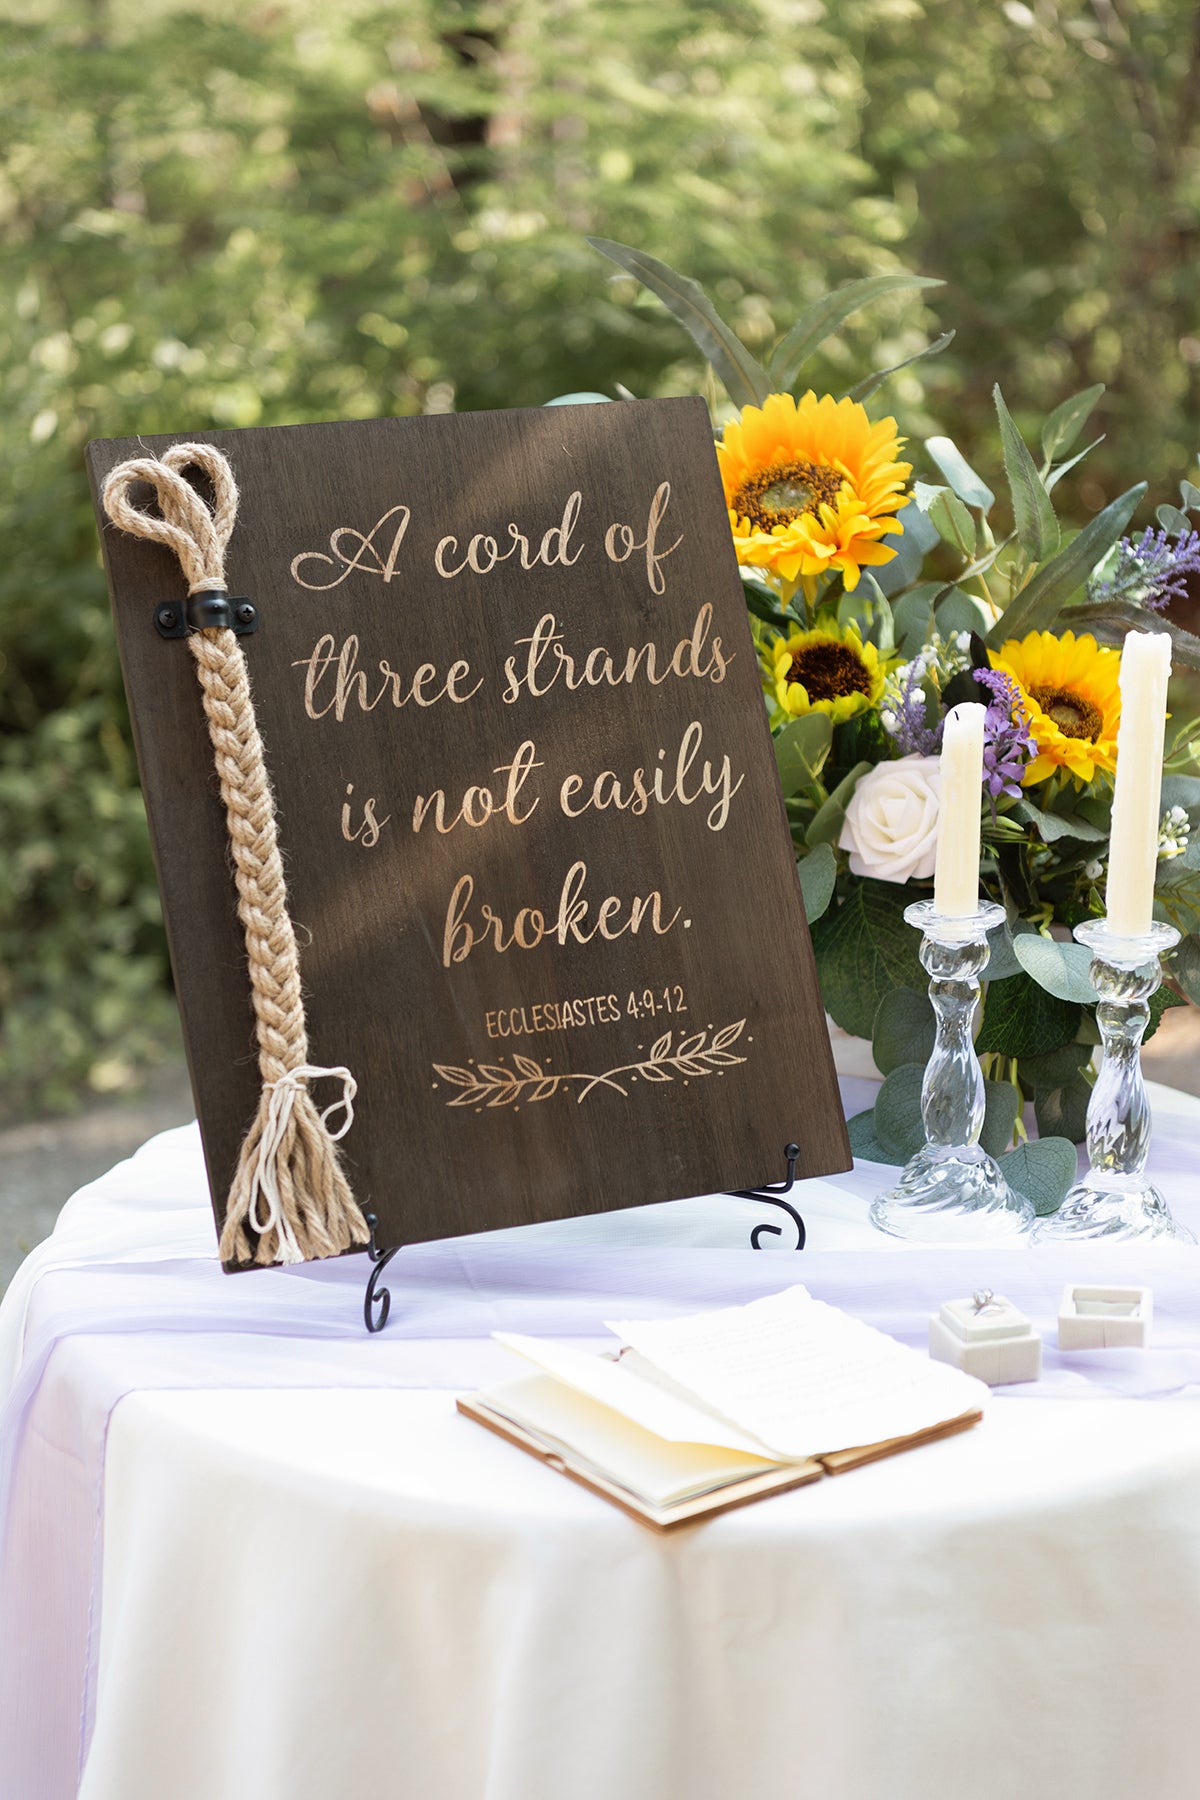 Strand of Three Cords Wedding Ceremony Sign - A Cord of Three Strands is not Easily Broken